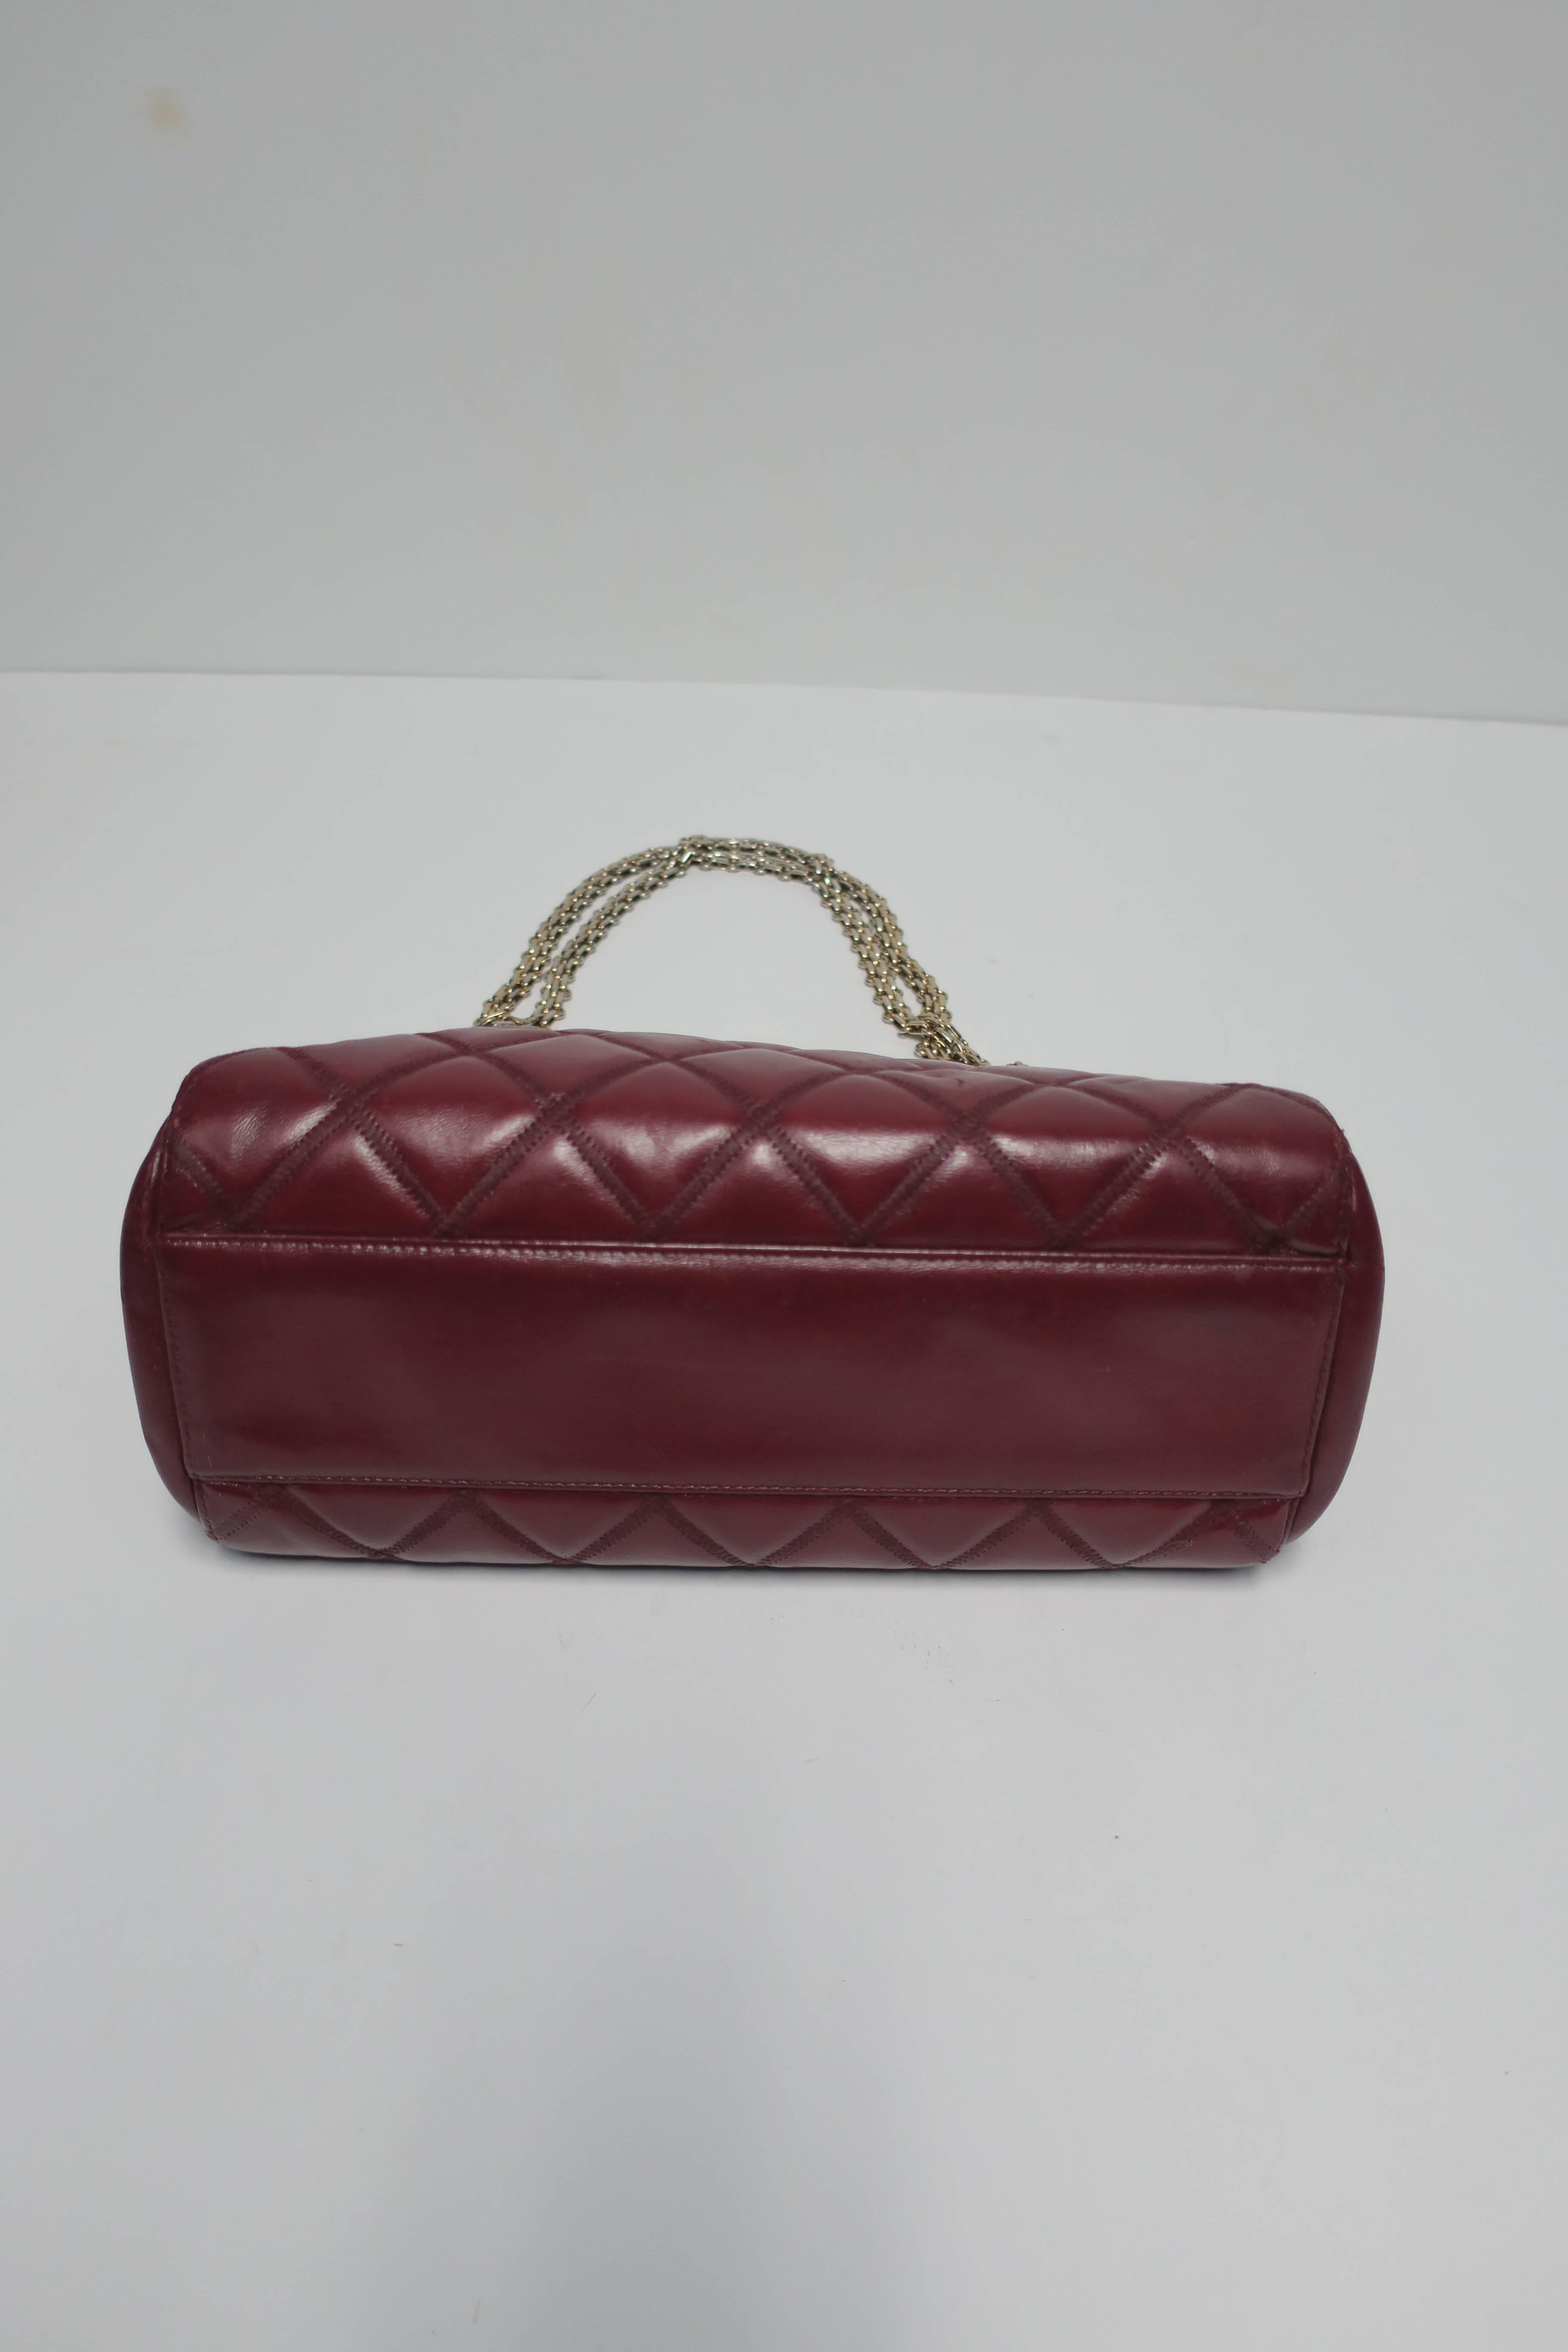 Chanel Burgundy Red Leather Bag 1